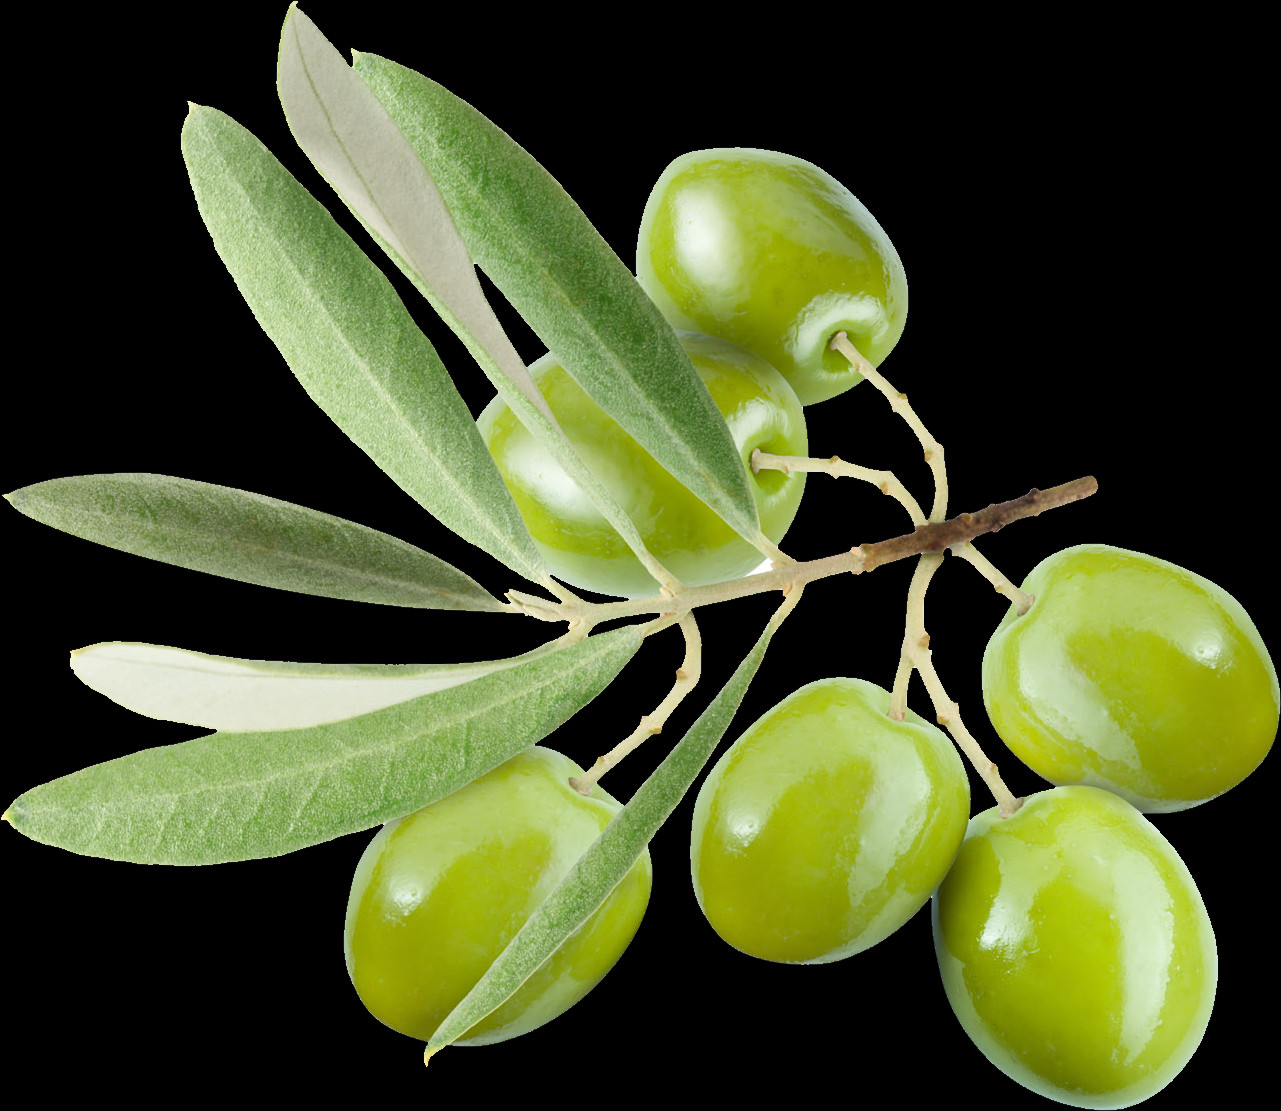 The Top Free Png Stock Image Site On The Web - Olive (1281x1111), Png Download